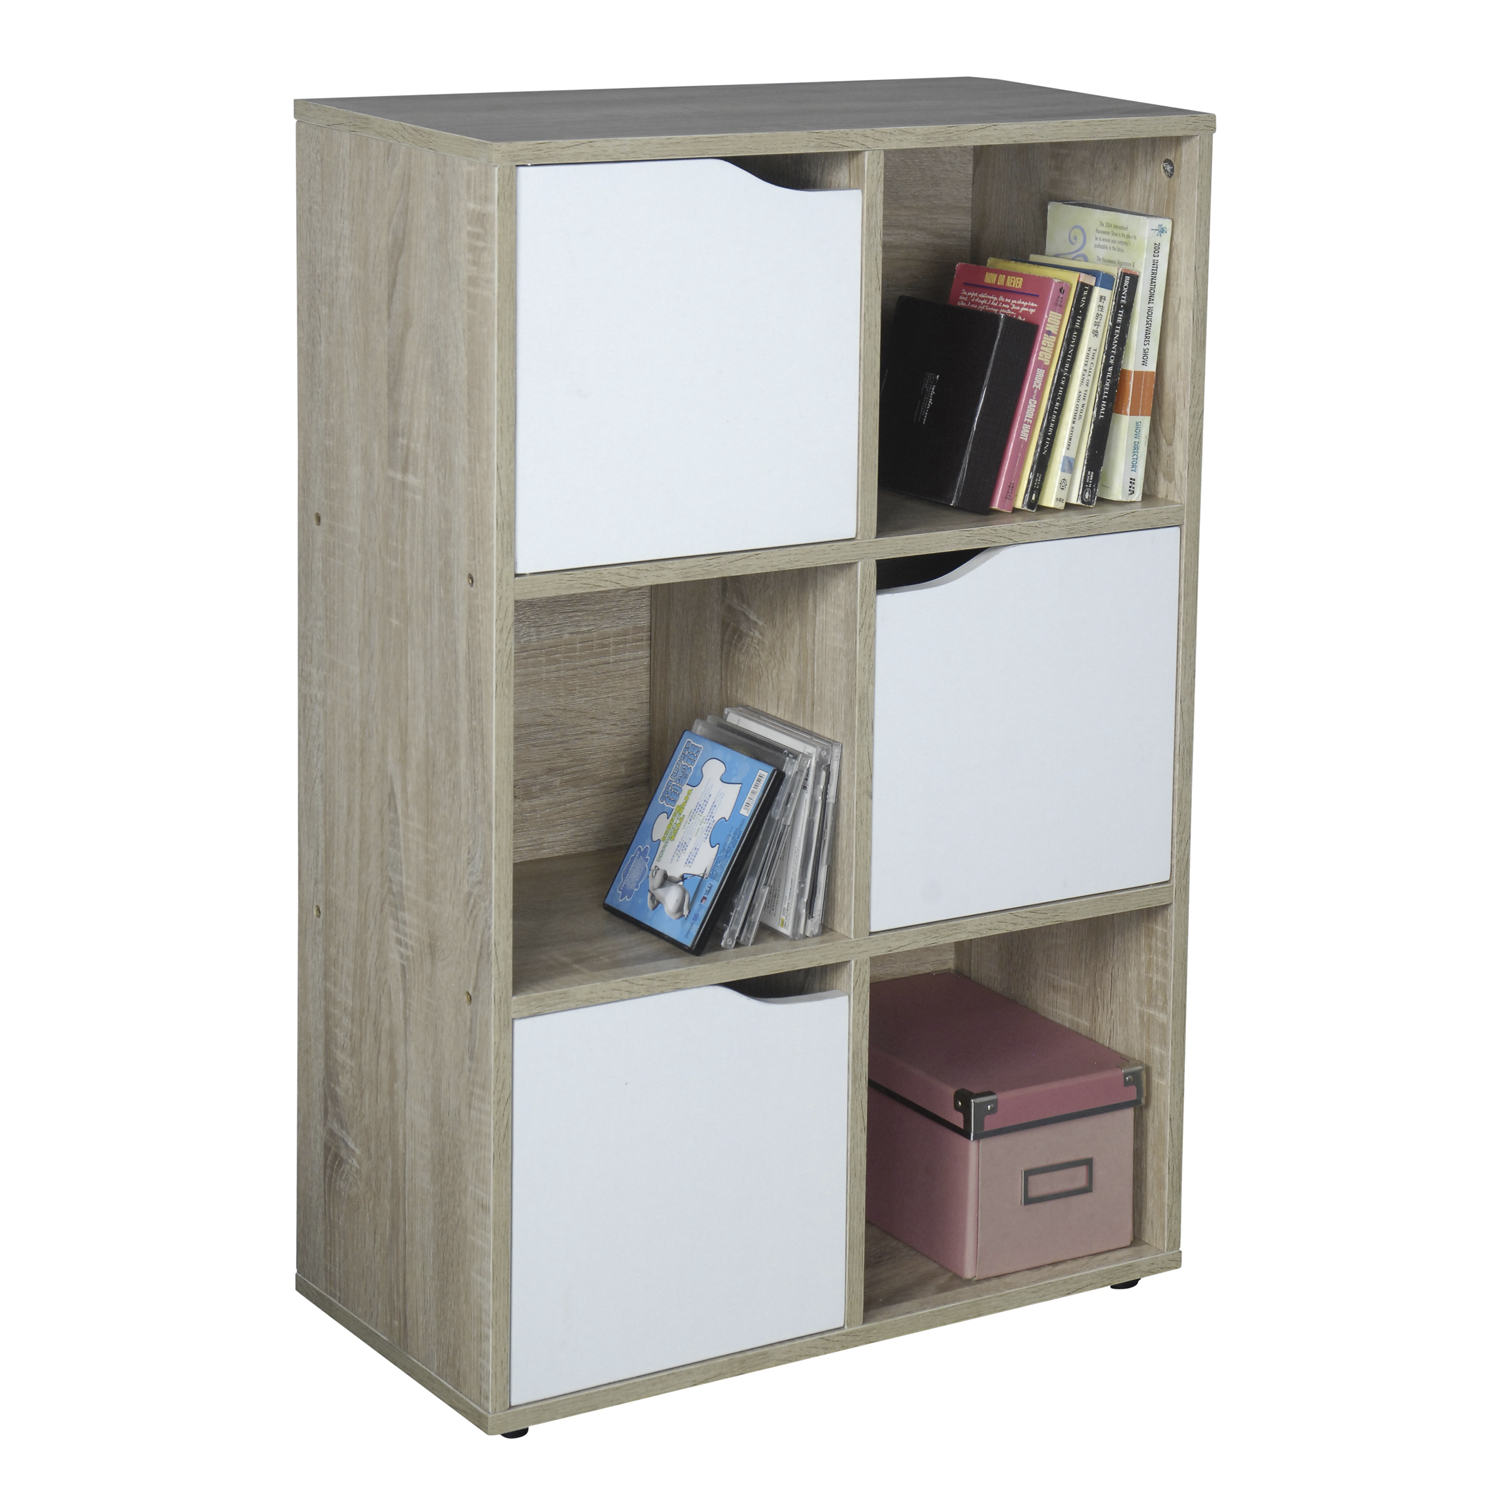 Saturn 6 Compartment Brown and White Cube Storage Shelving Unit Image 2